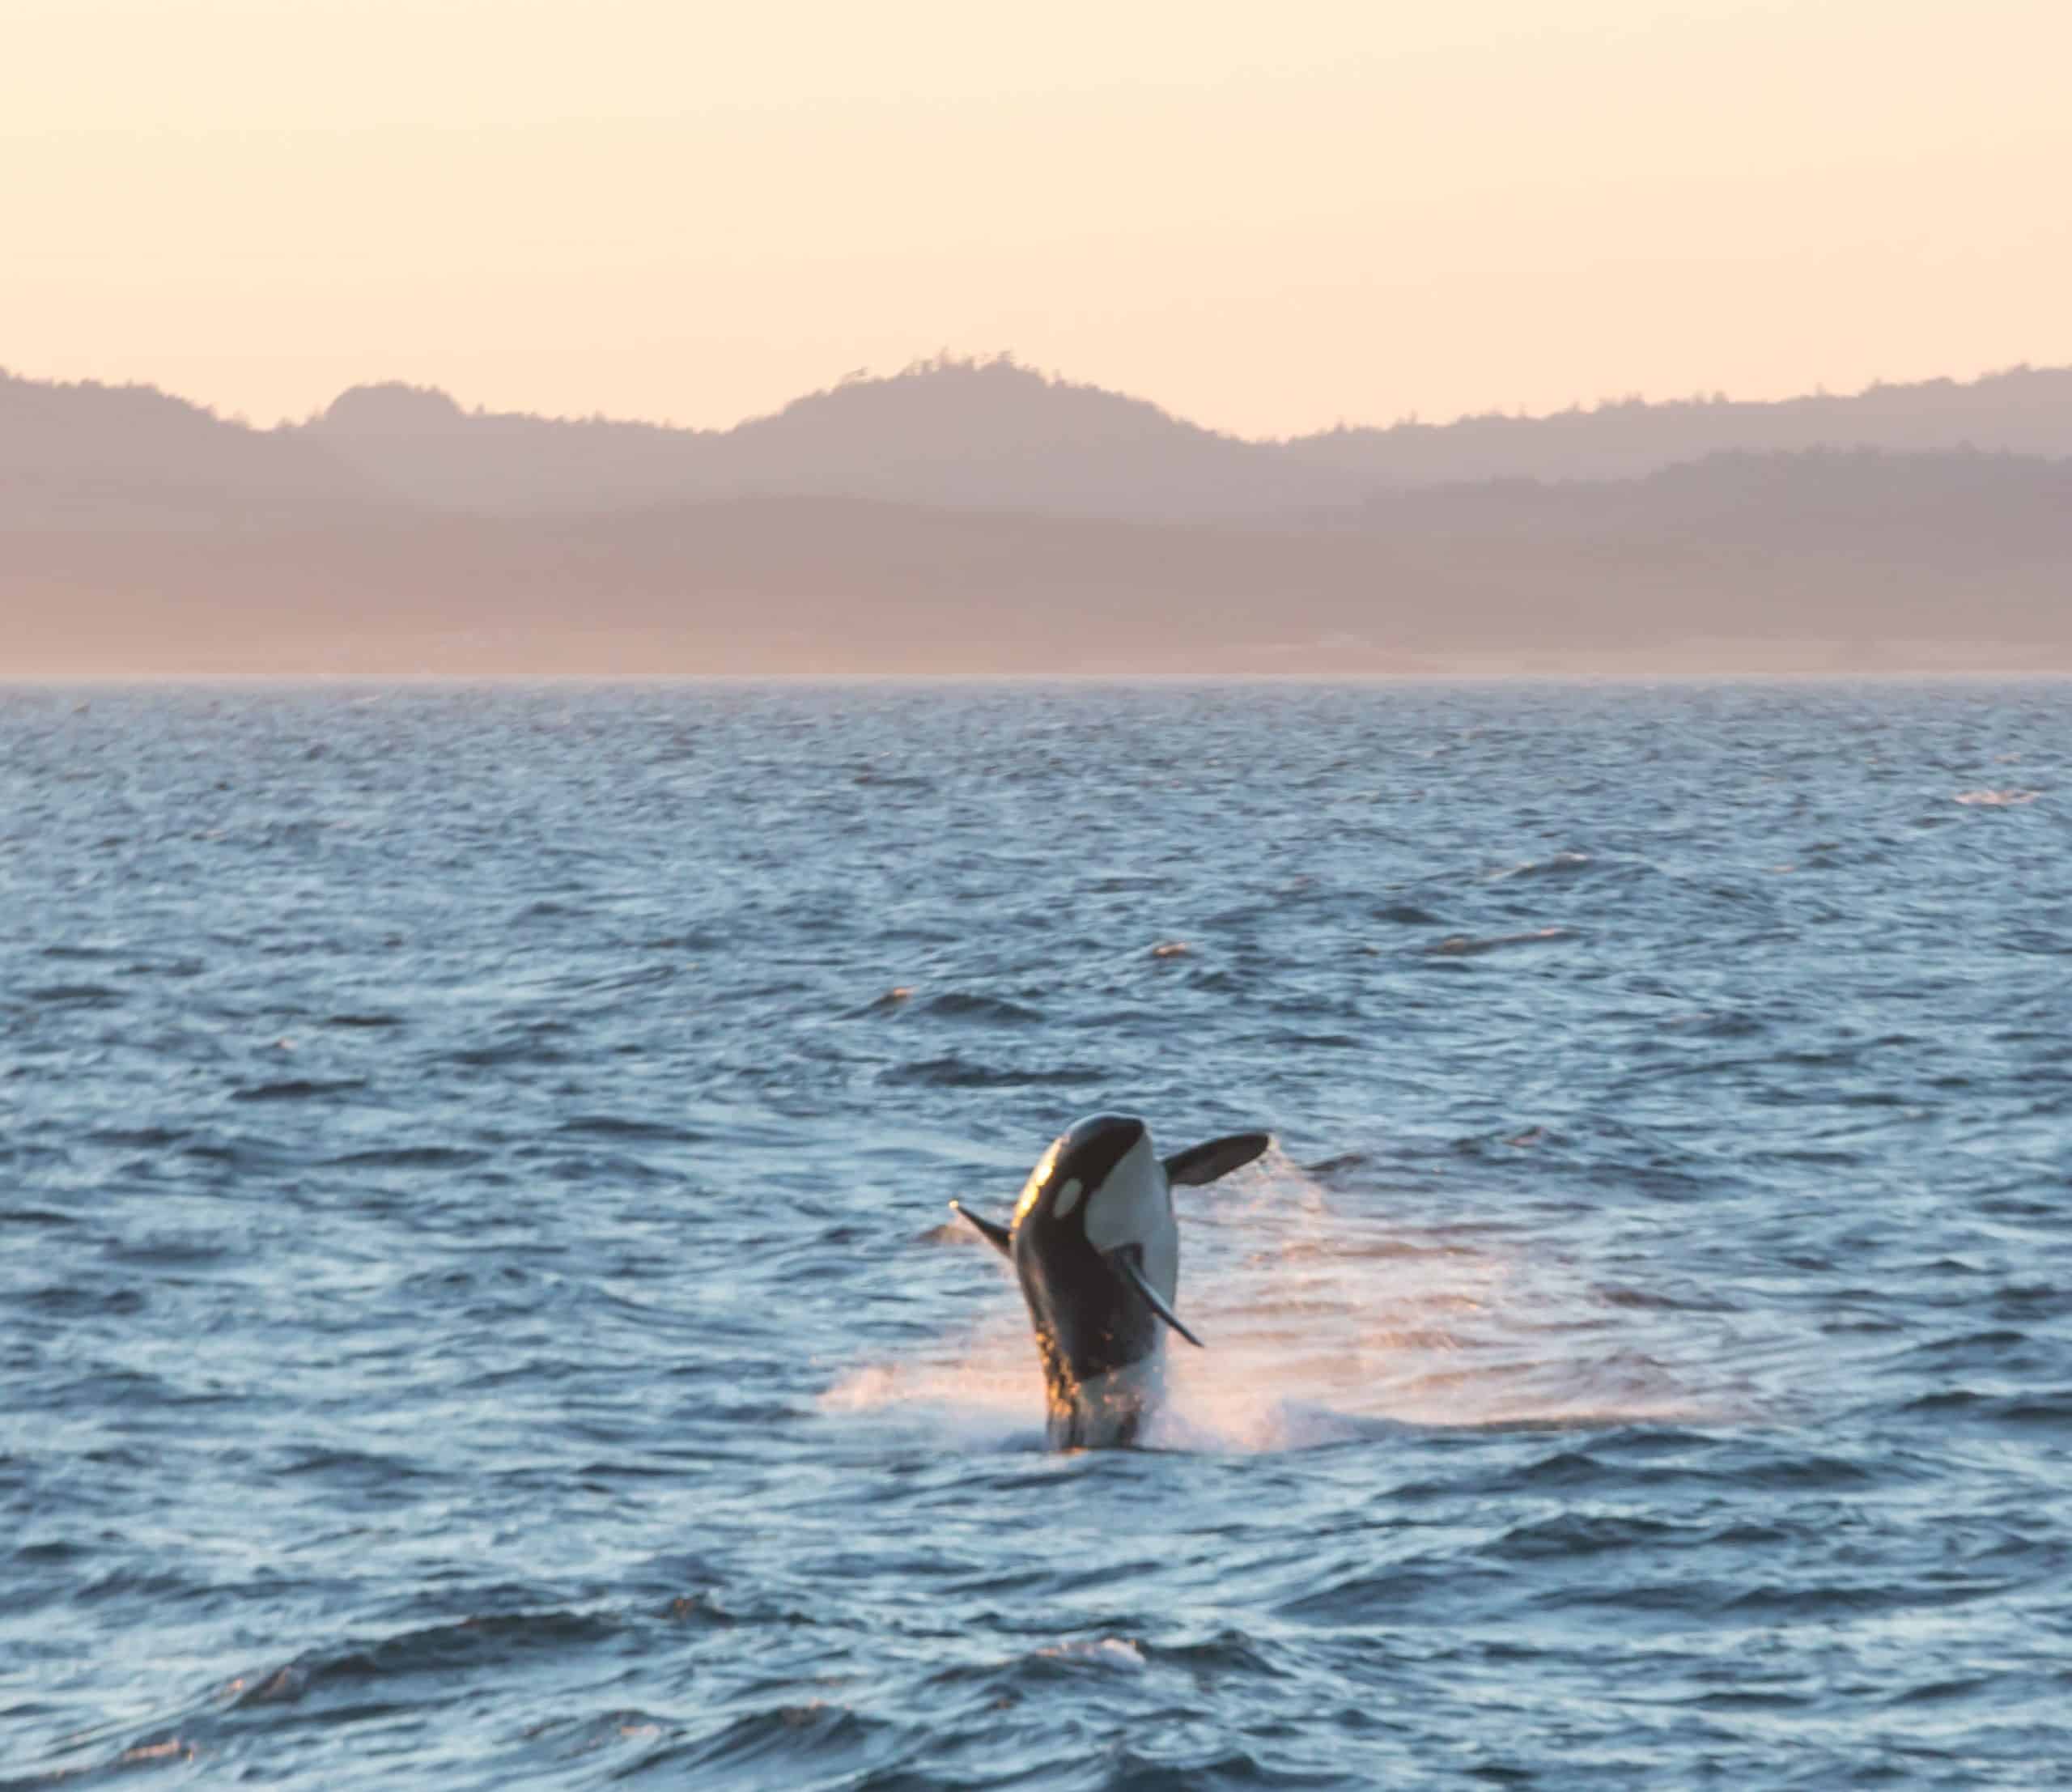 An orca leaping out of the water at dusk, as seen on an Orca Spirit whale watching tour. 